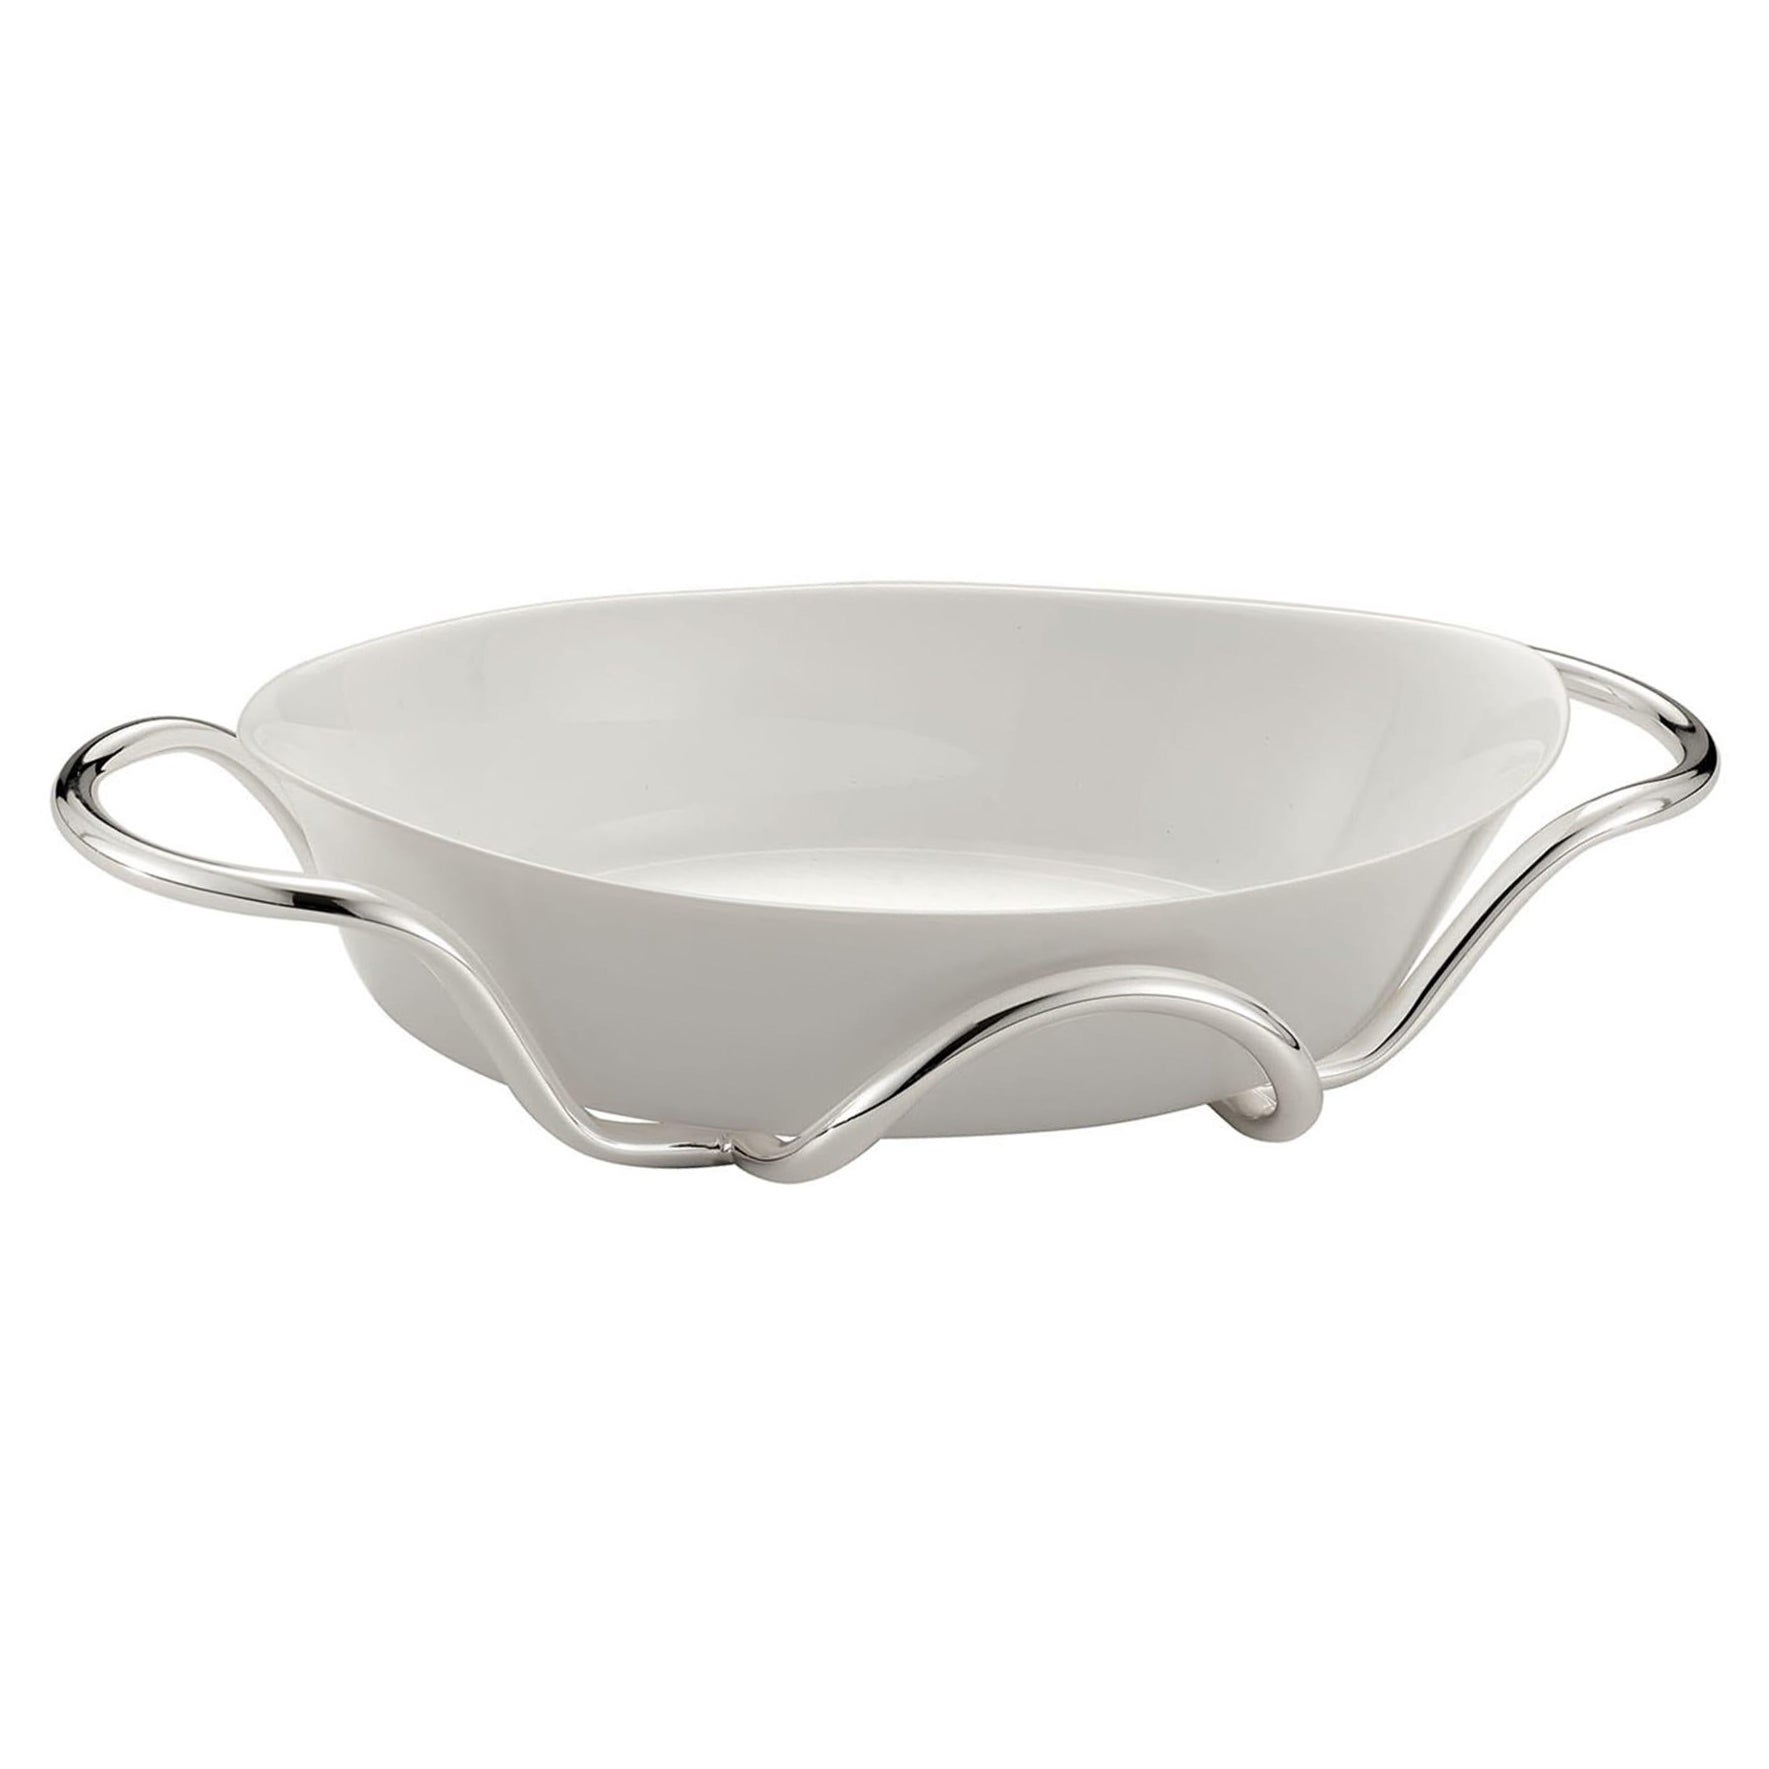 Oval Baking Dish with Silver Holder by Itamar Harari